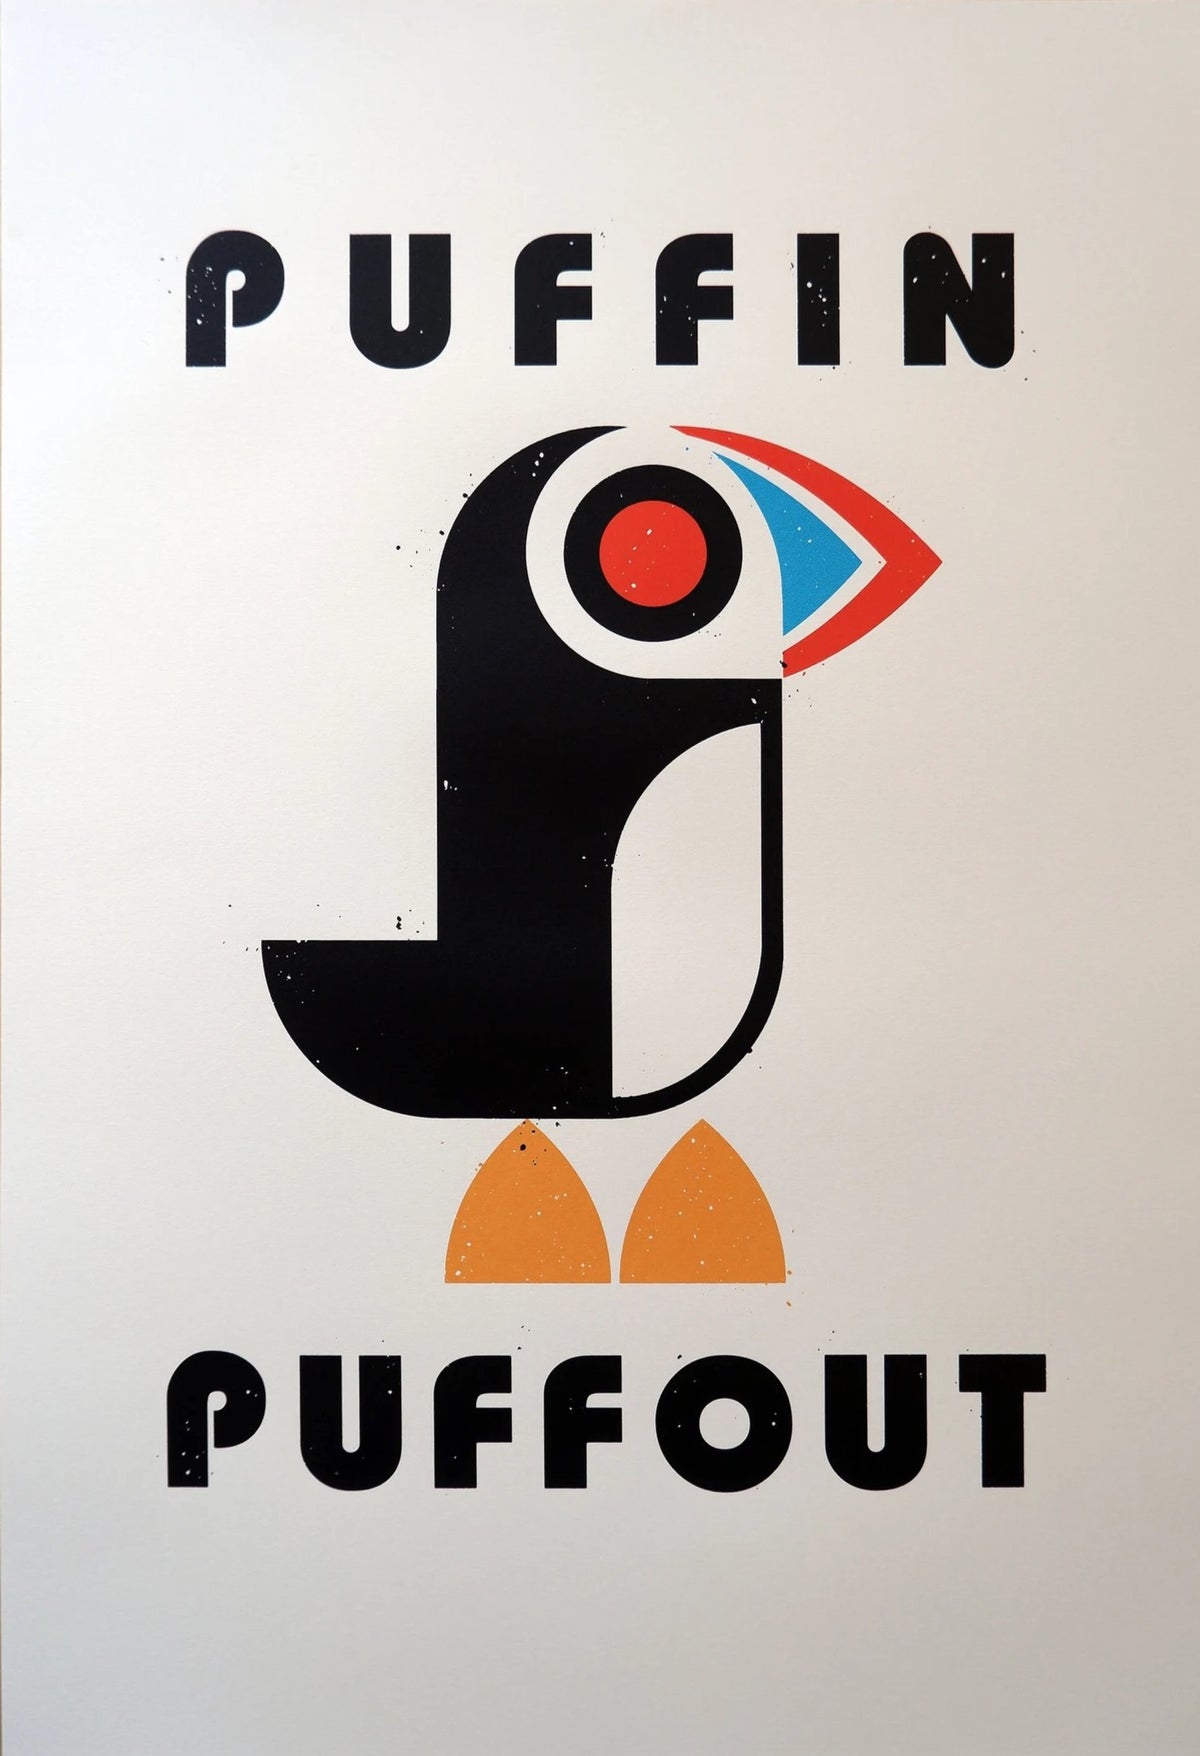 Puffin, Puffout by James Treadaway